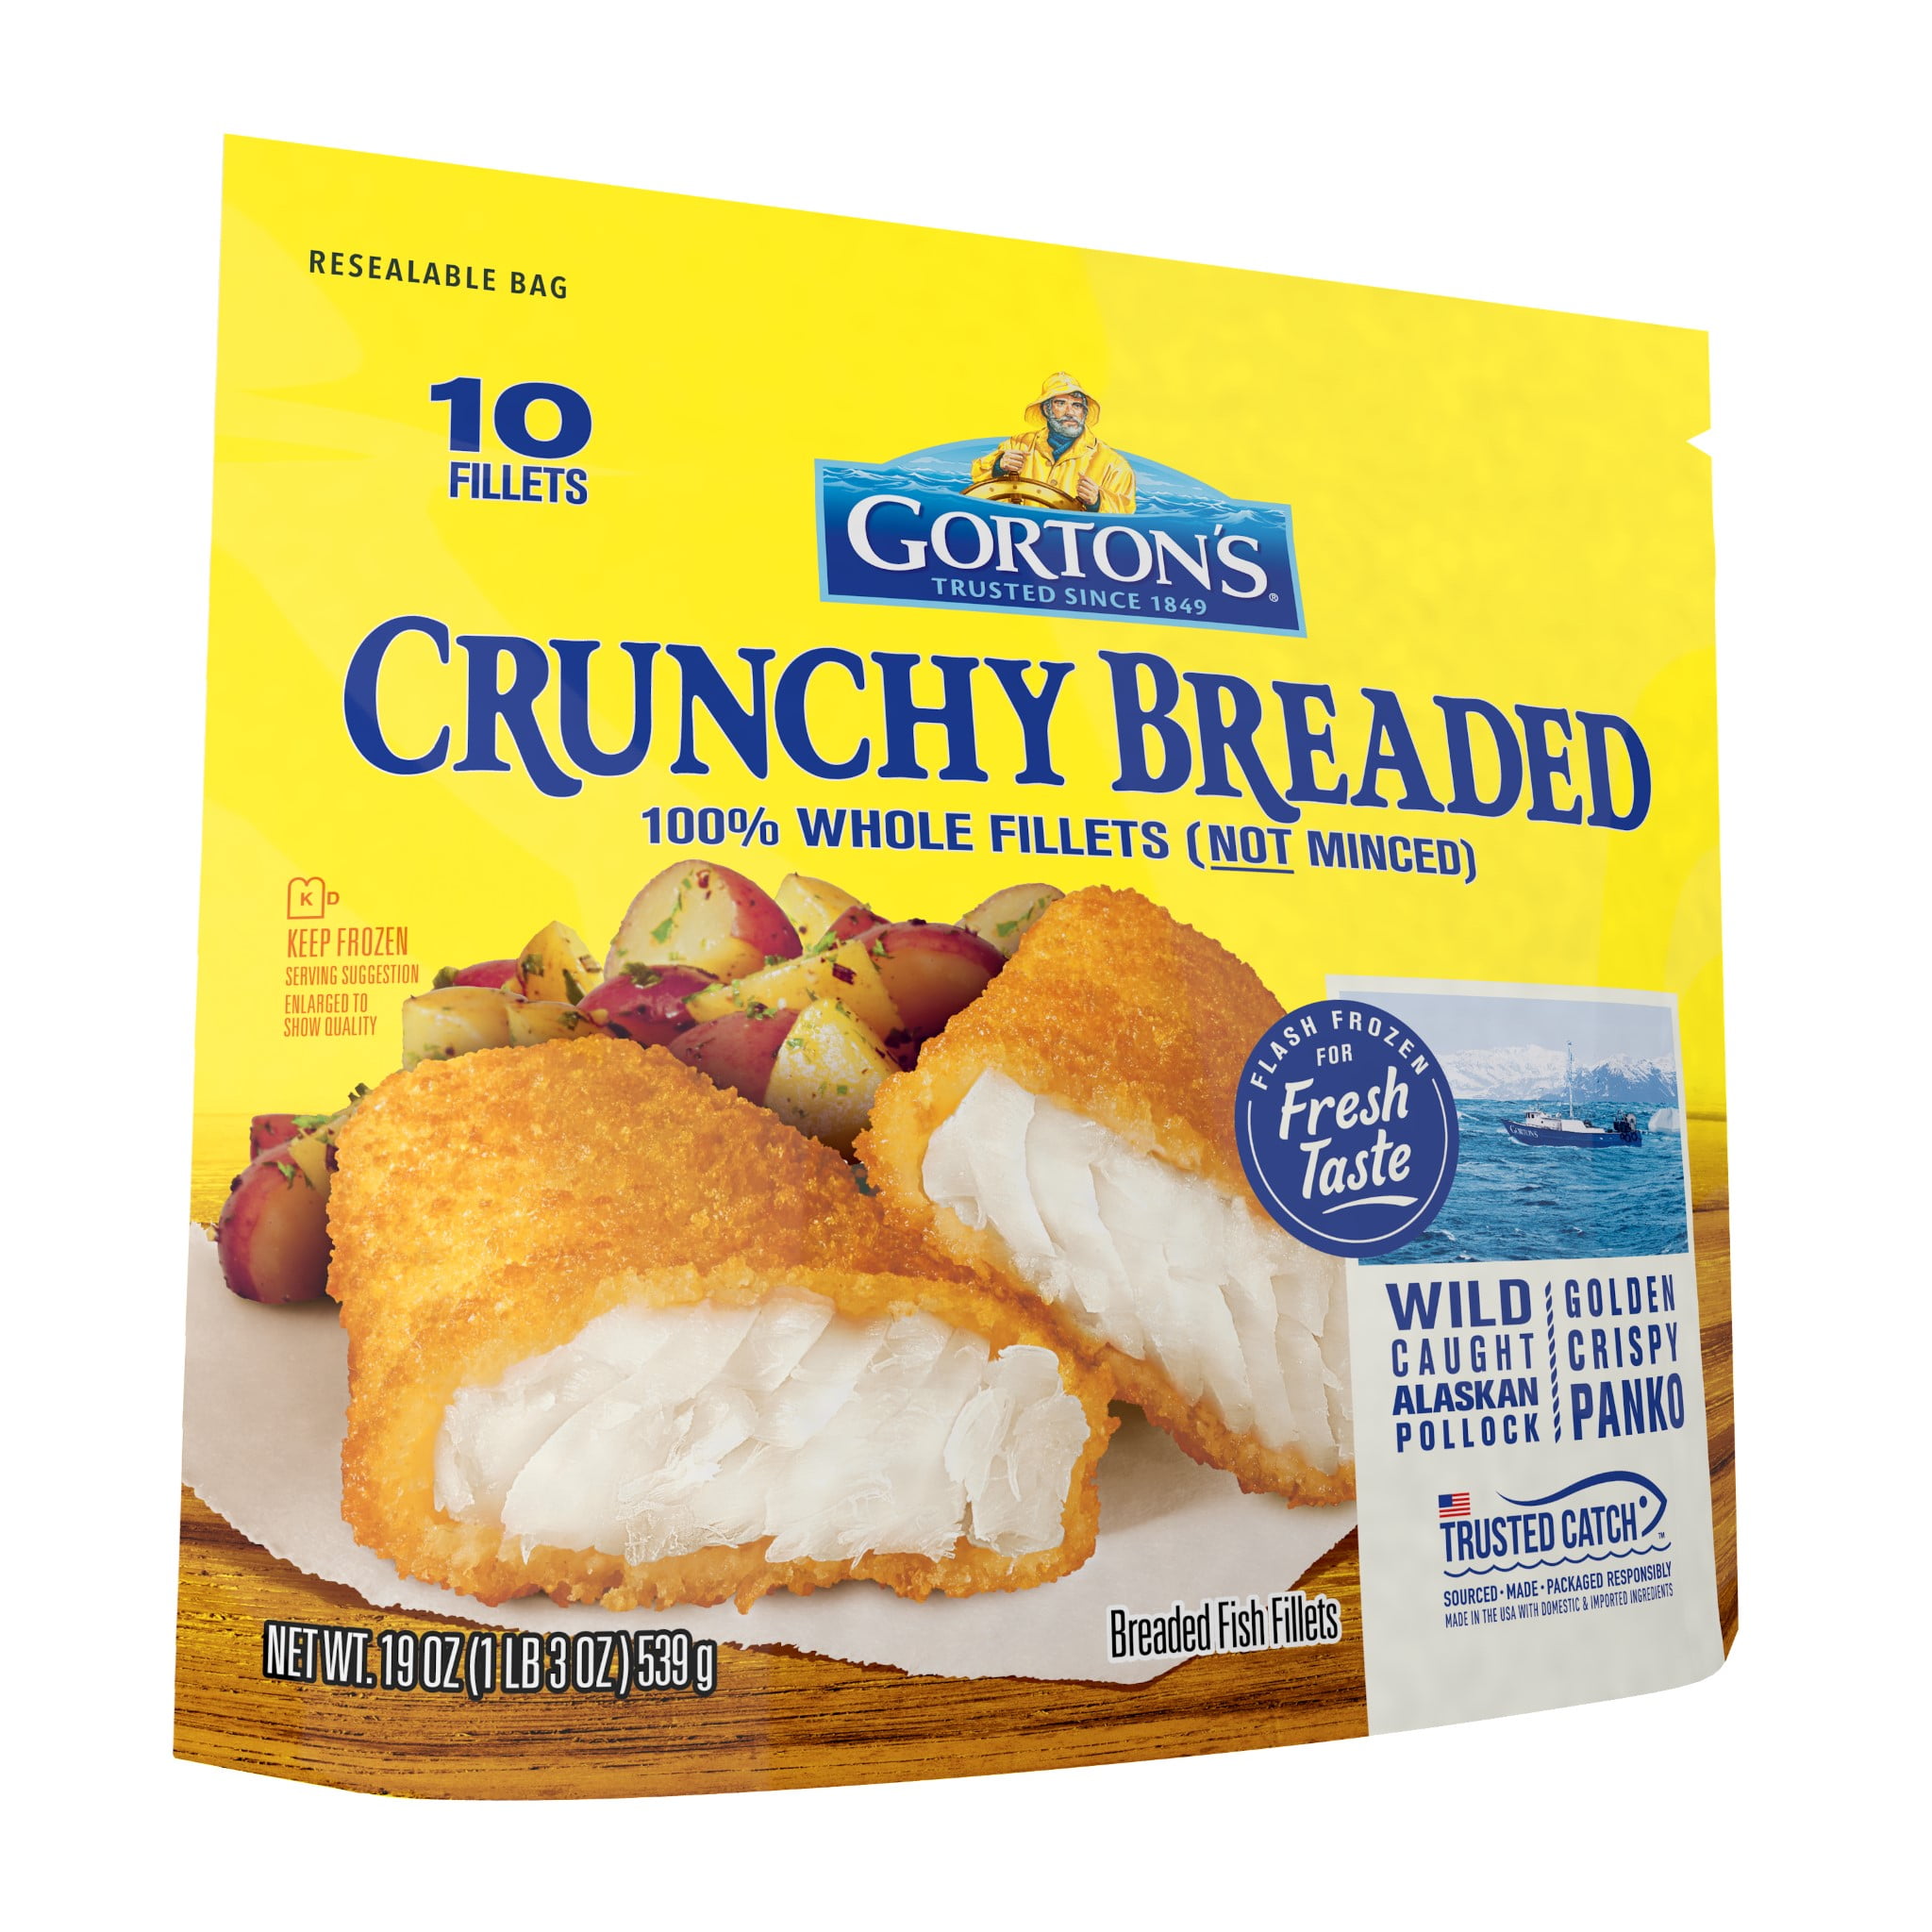 Gortons Crunchy Breaded Fish 100% Whole Fillets, Wild Caught Alaskan Pollock with Crunchy Panko Breadcrumbs, Frozen, 10 Count, 19 Ounce Resealable Bag